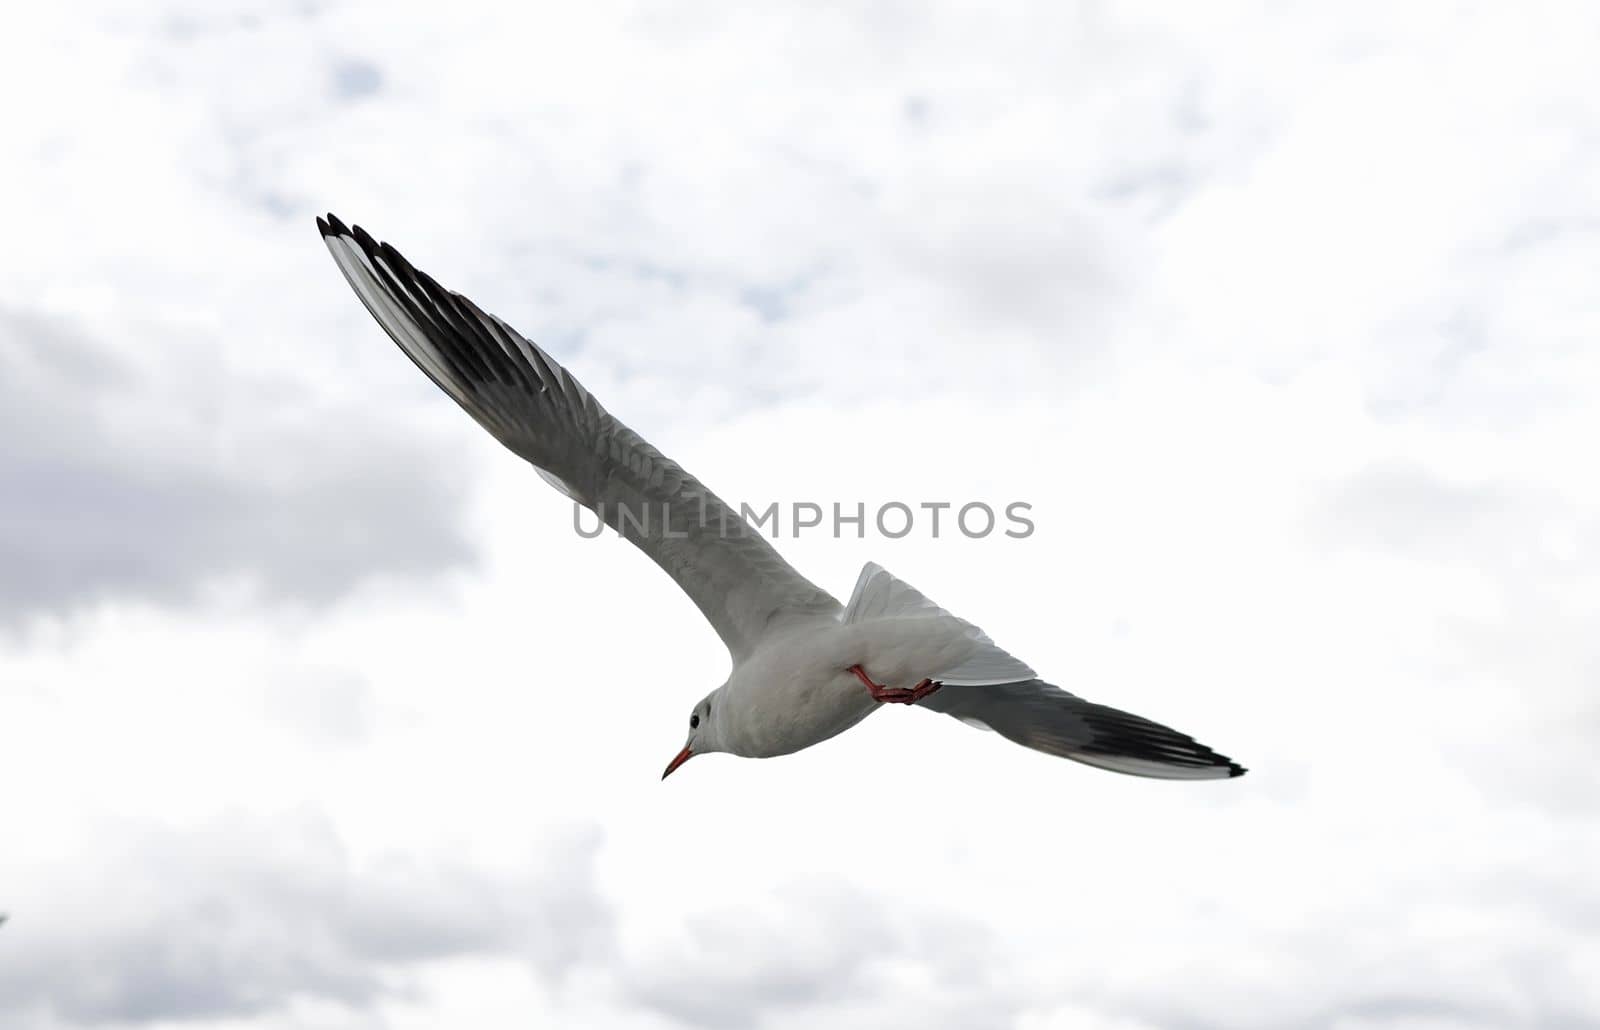 flying seagull with spread wings against a cloudy sky by Proxima13